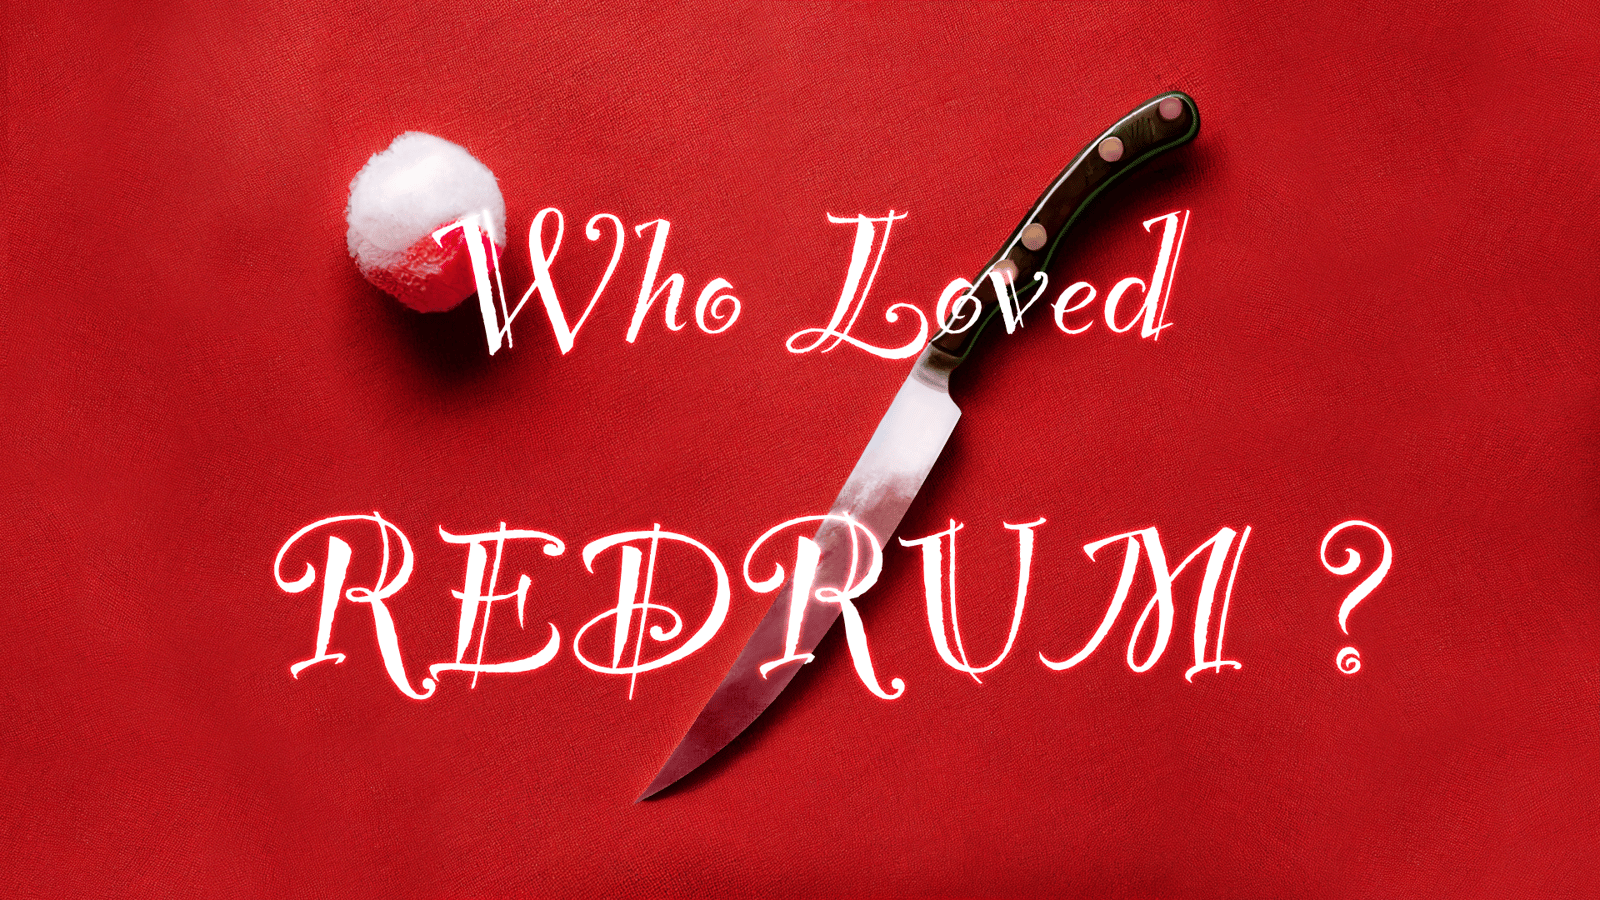 Who Loved REDRUM?